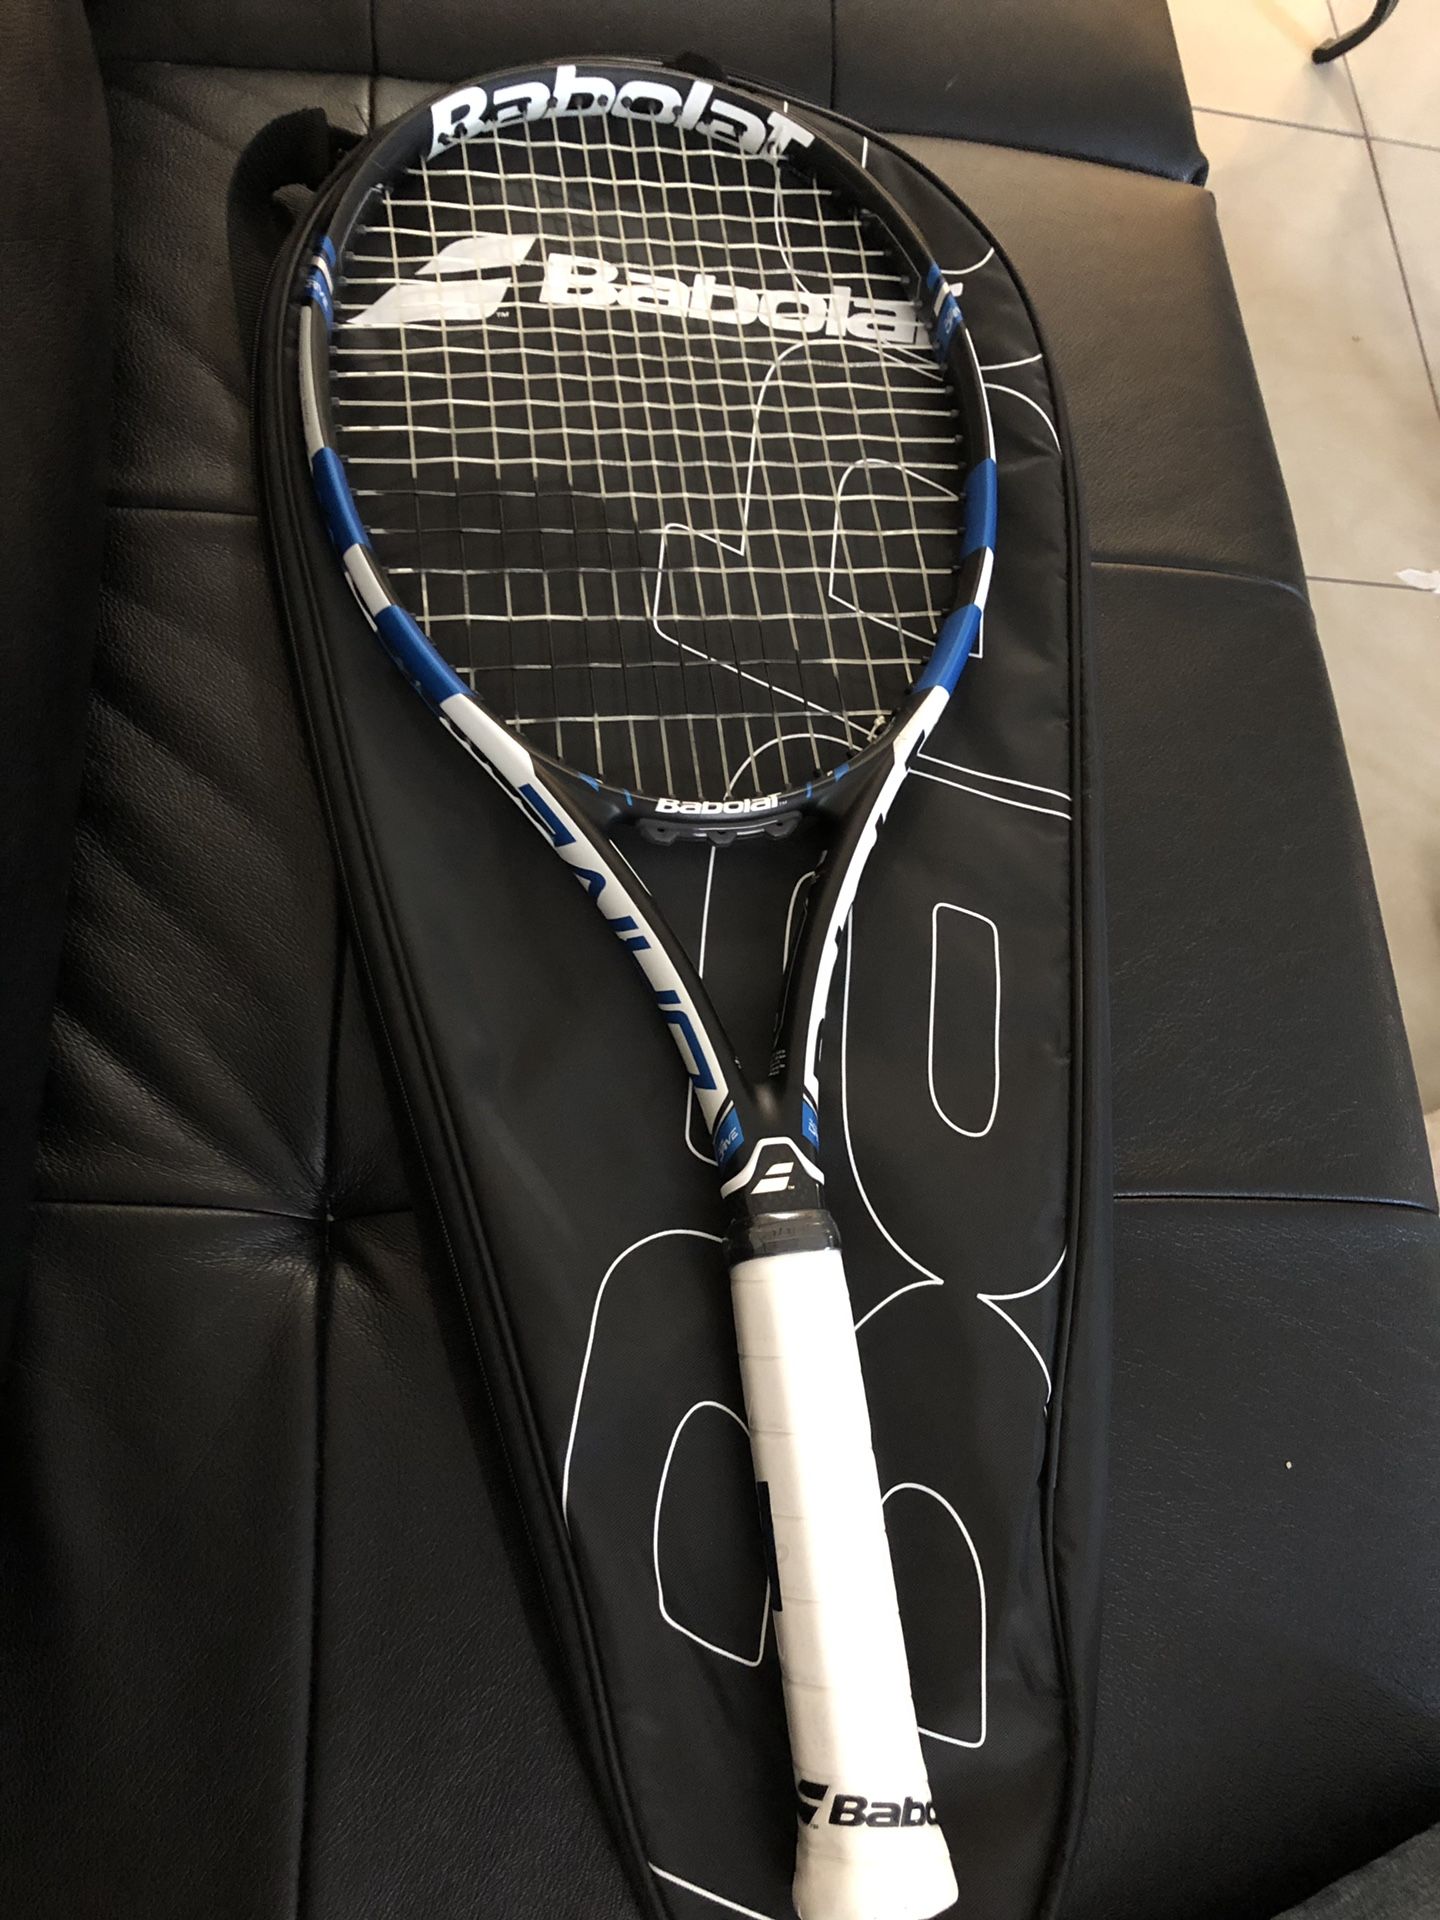 Babolat PURE DRIVE tennis racket for sale !!! (BRAND NEW)